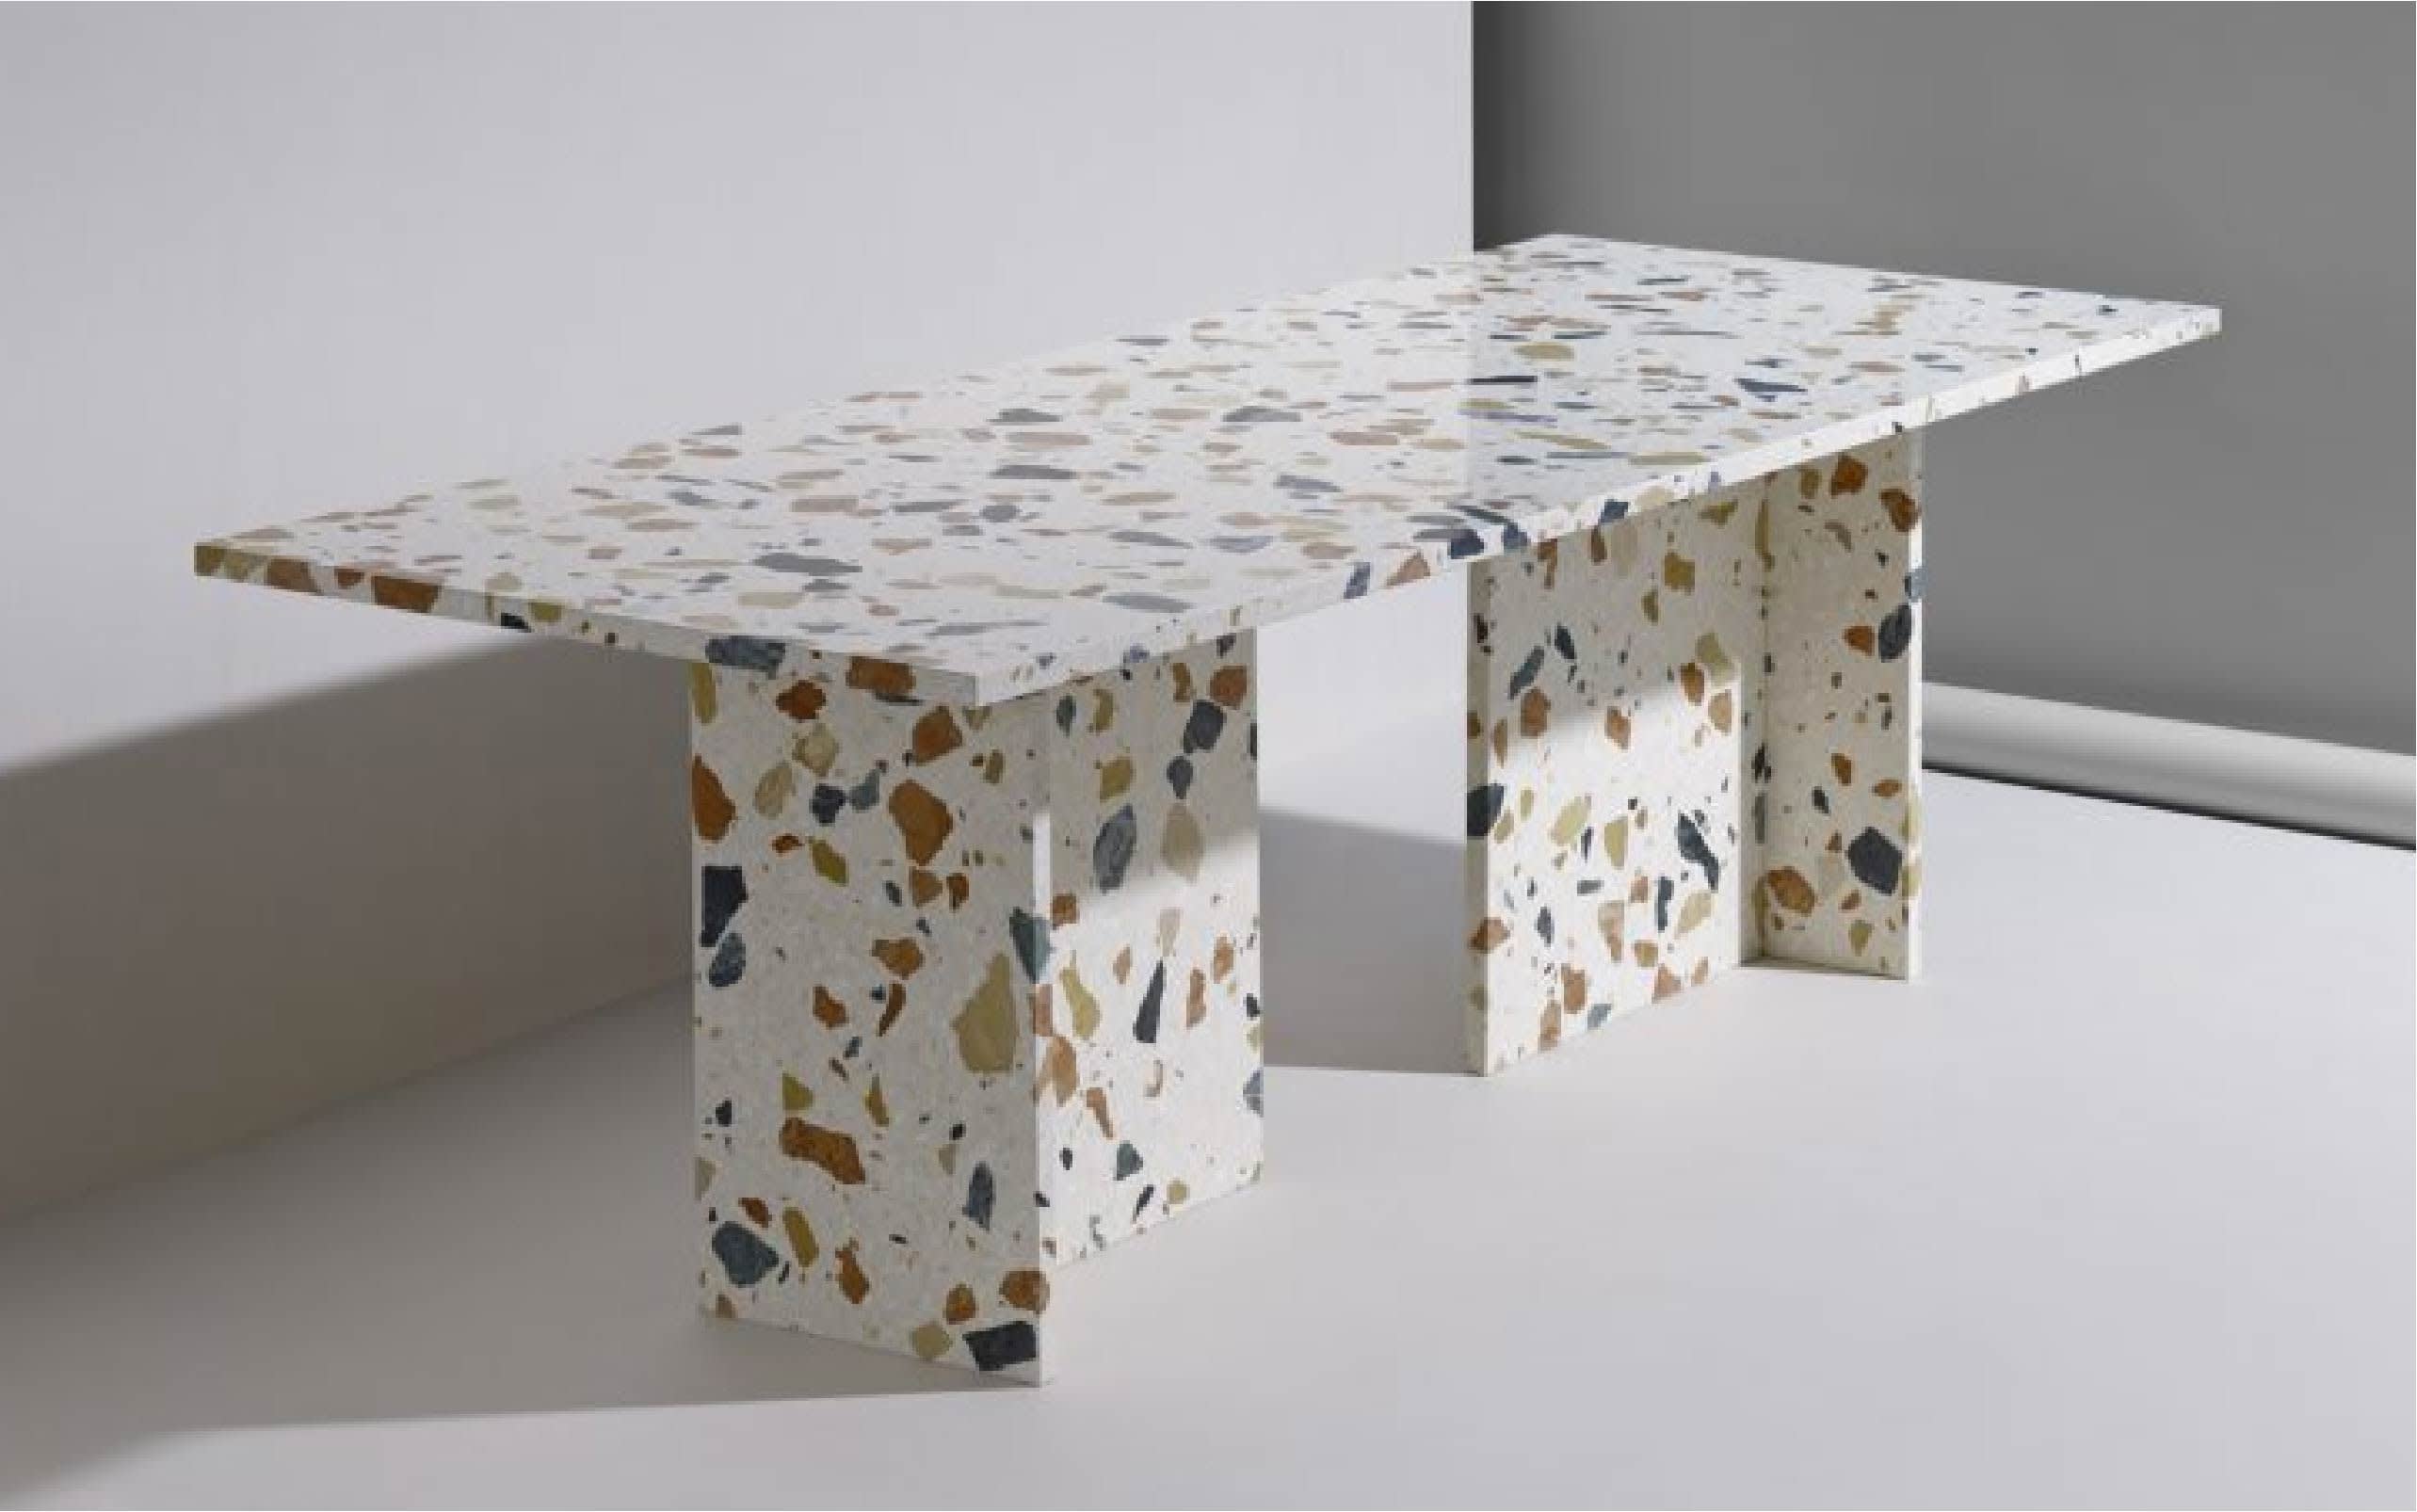 Marmoreal Dining Table / Desk designed by Max Lamb